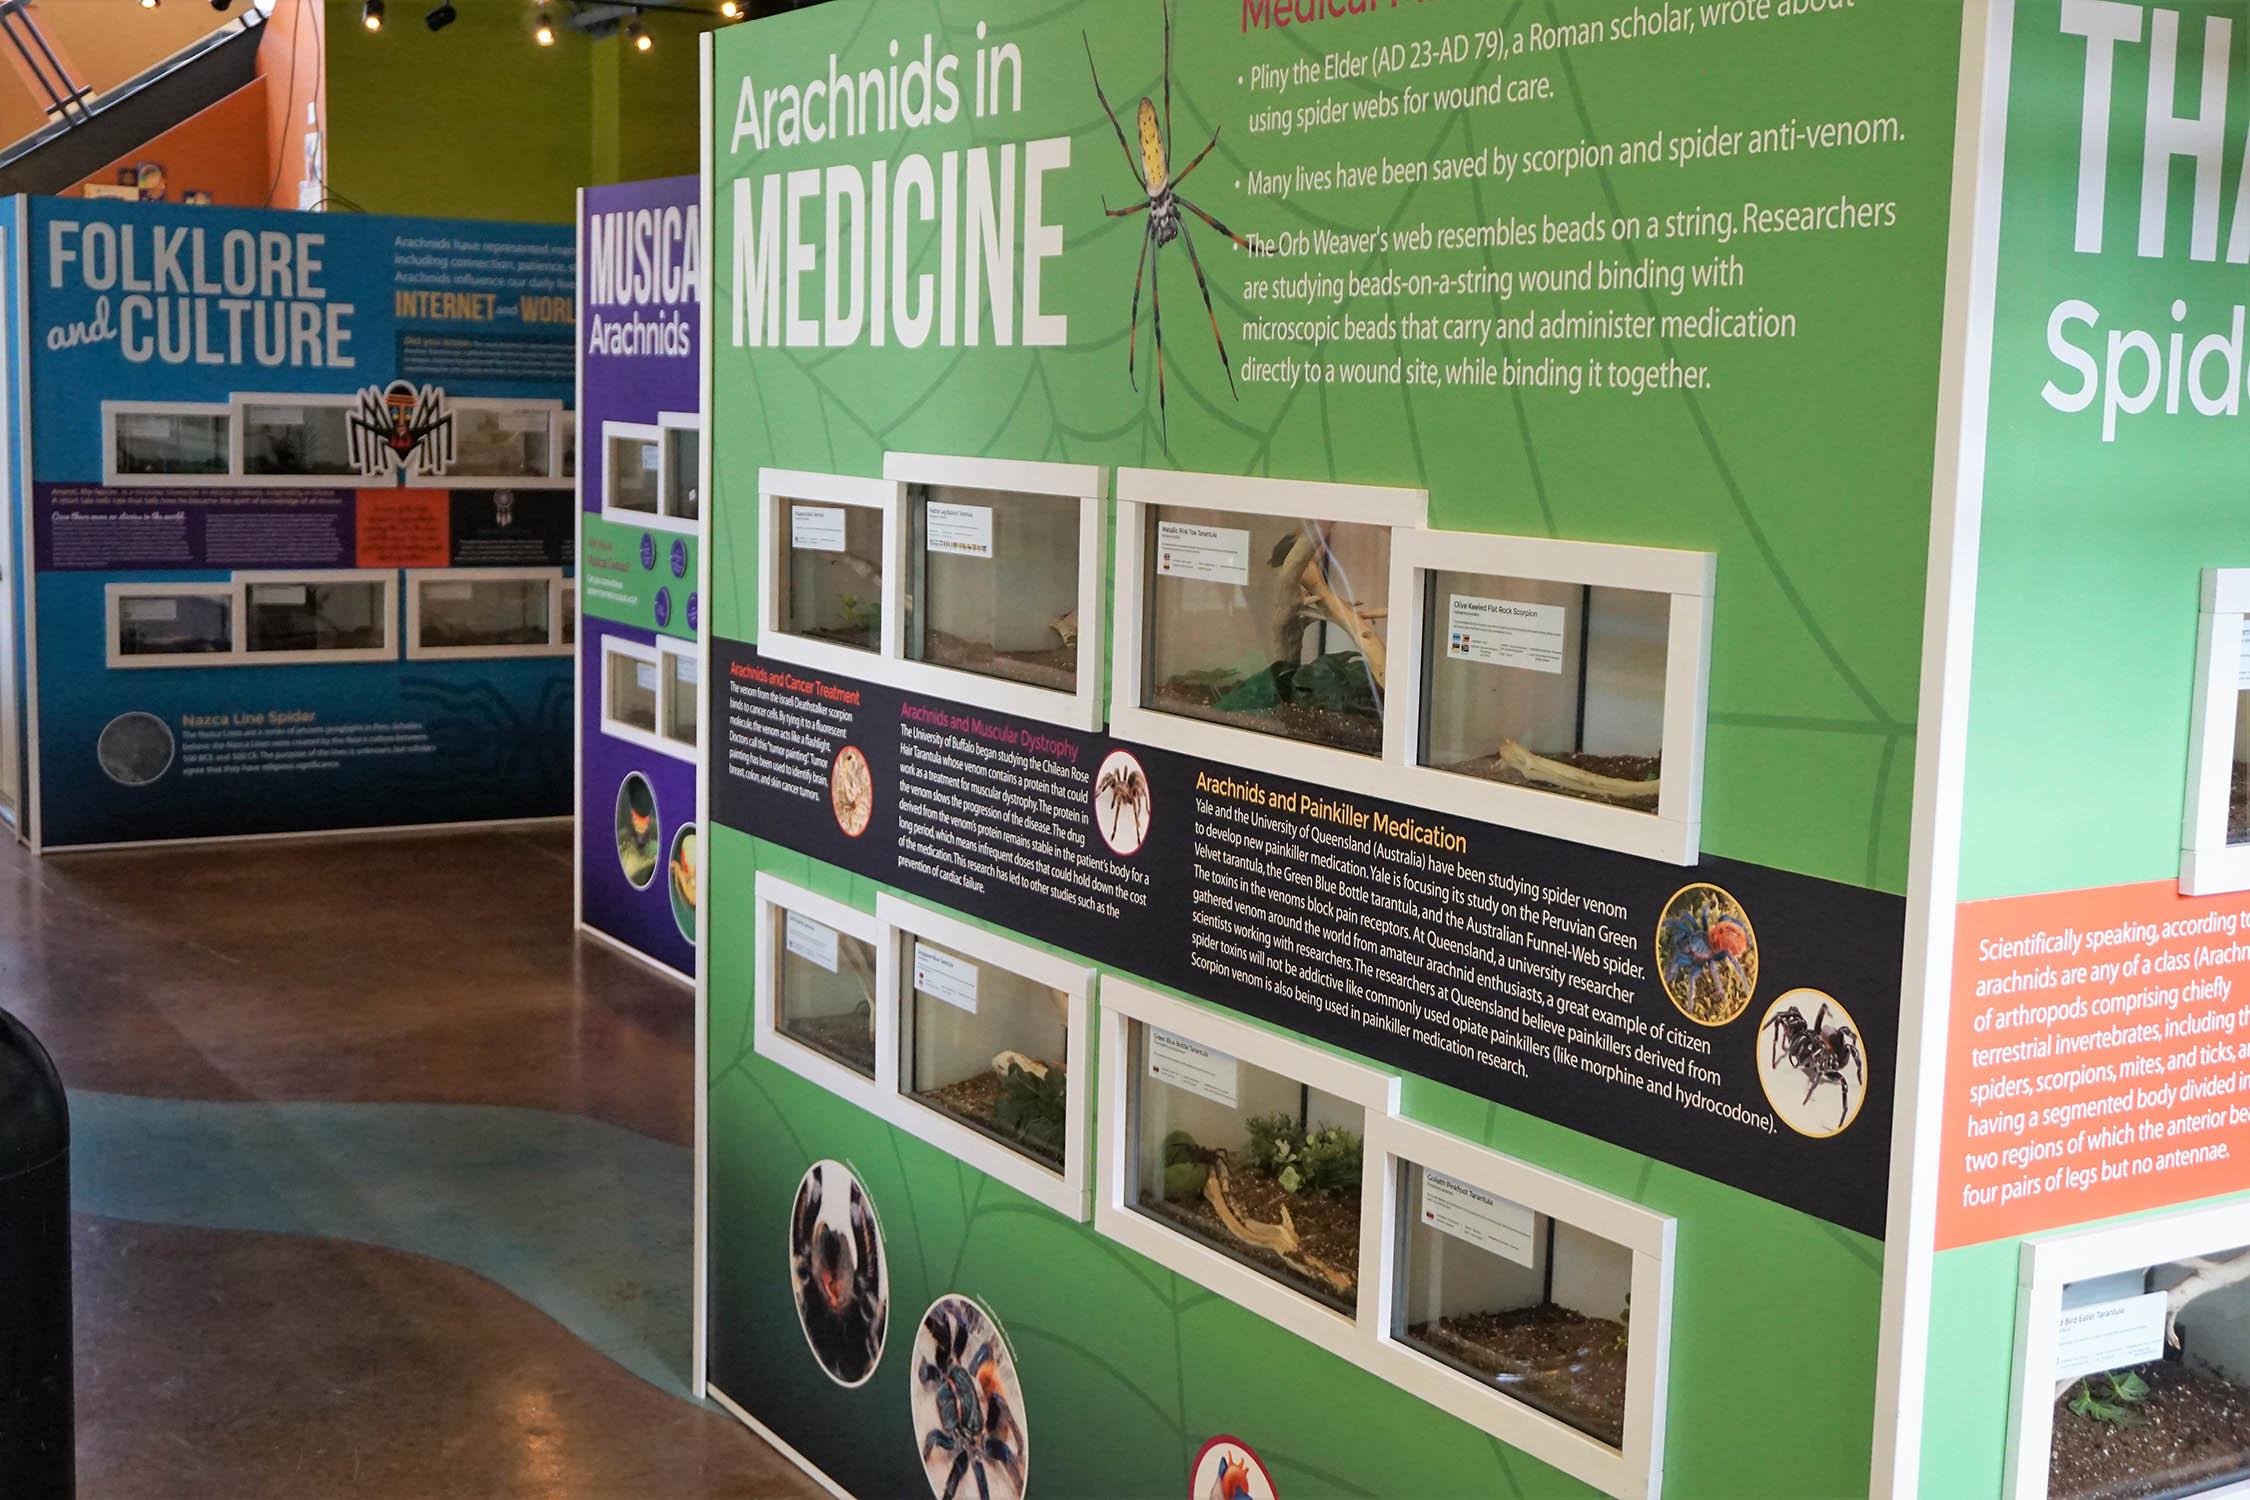 Brookfield Zoo’s exhibit highlights the significance of arachnids in art, culture and science and medicine. (Jim Schulz / Chicago Zoological Society)